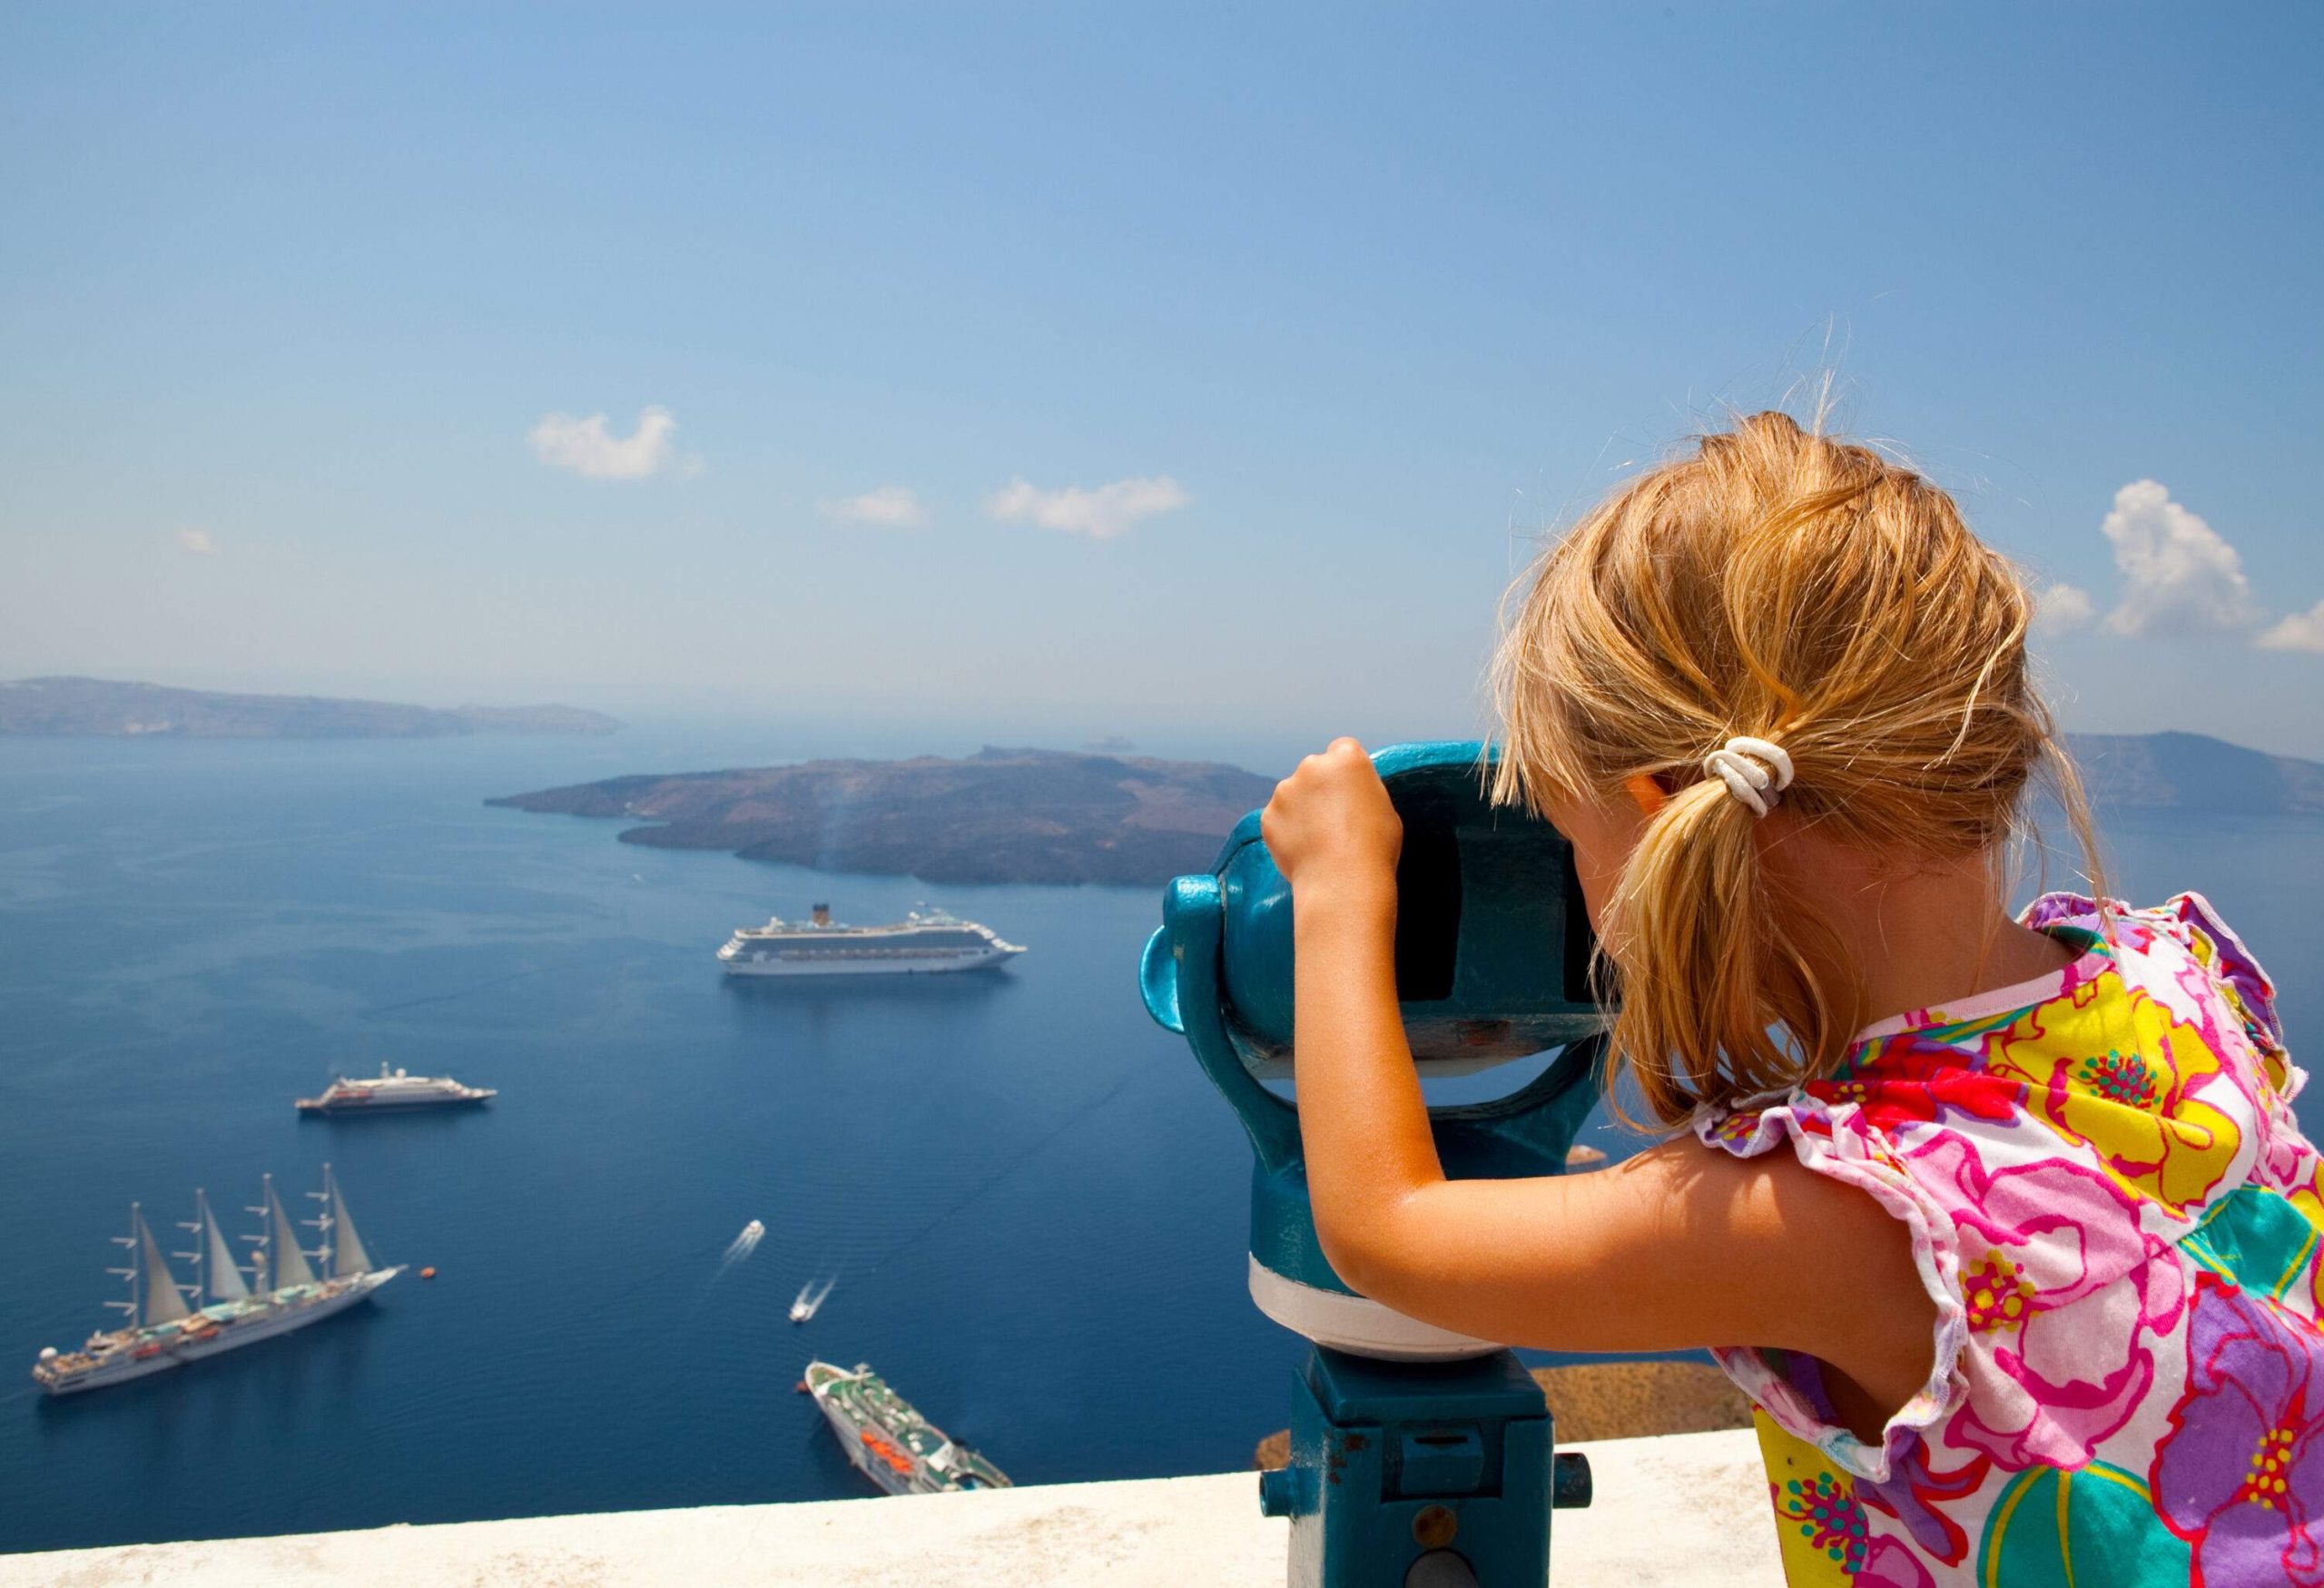 A little girl looking through binoculars at the boats cruising in the ocean from an observation deck.